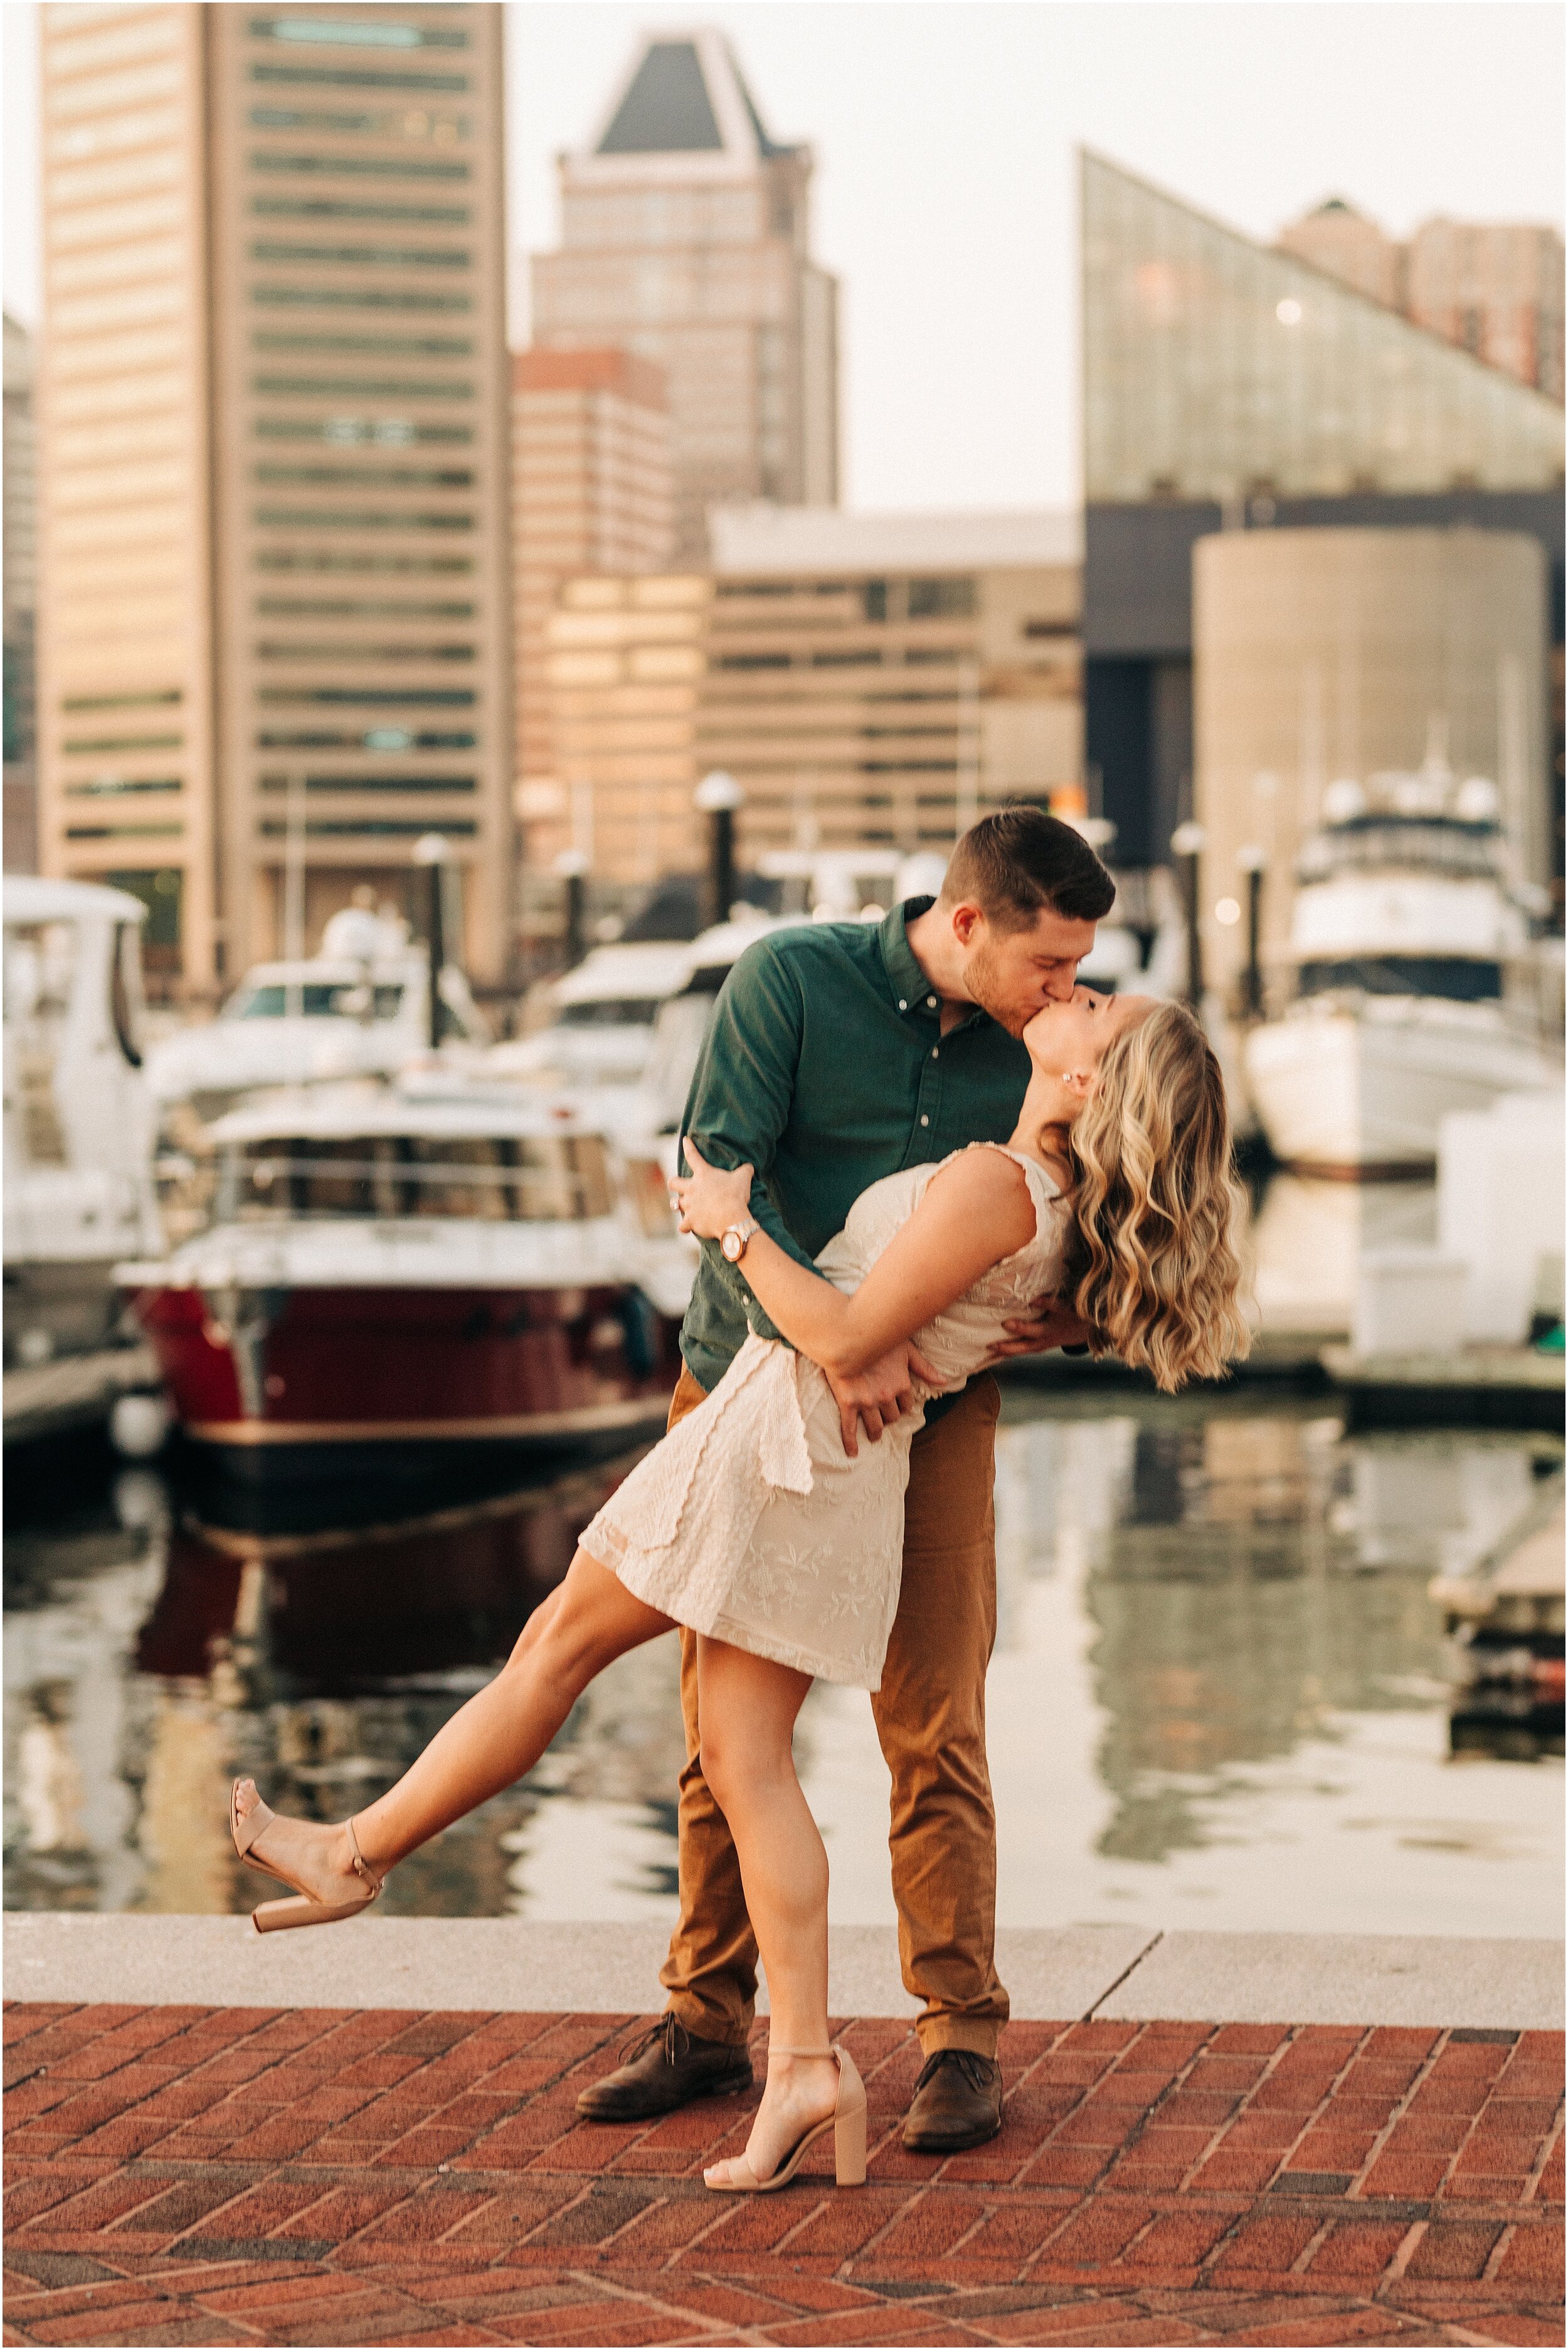 hannah leigh photography Baltimore City Maryland October Engagement Session_7072.jpg